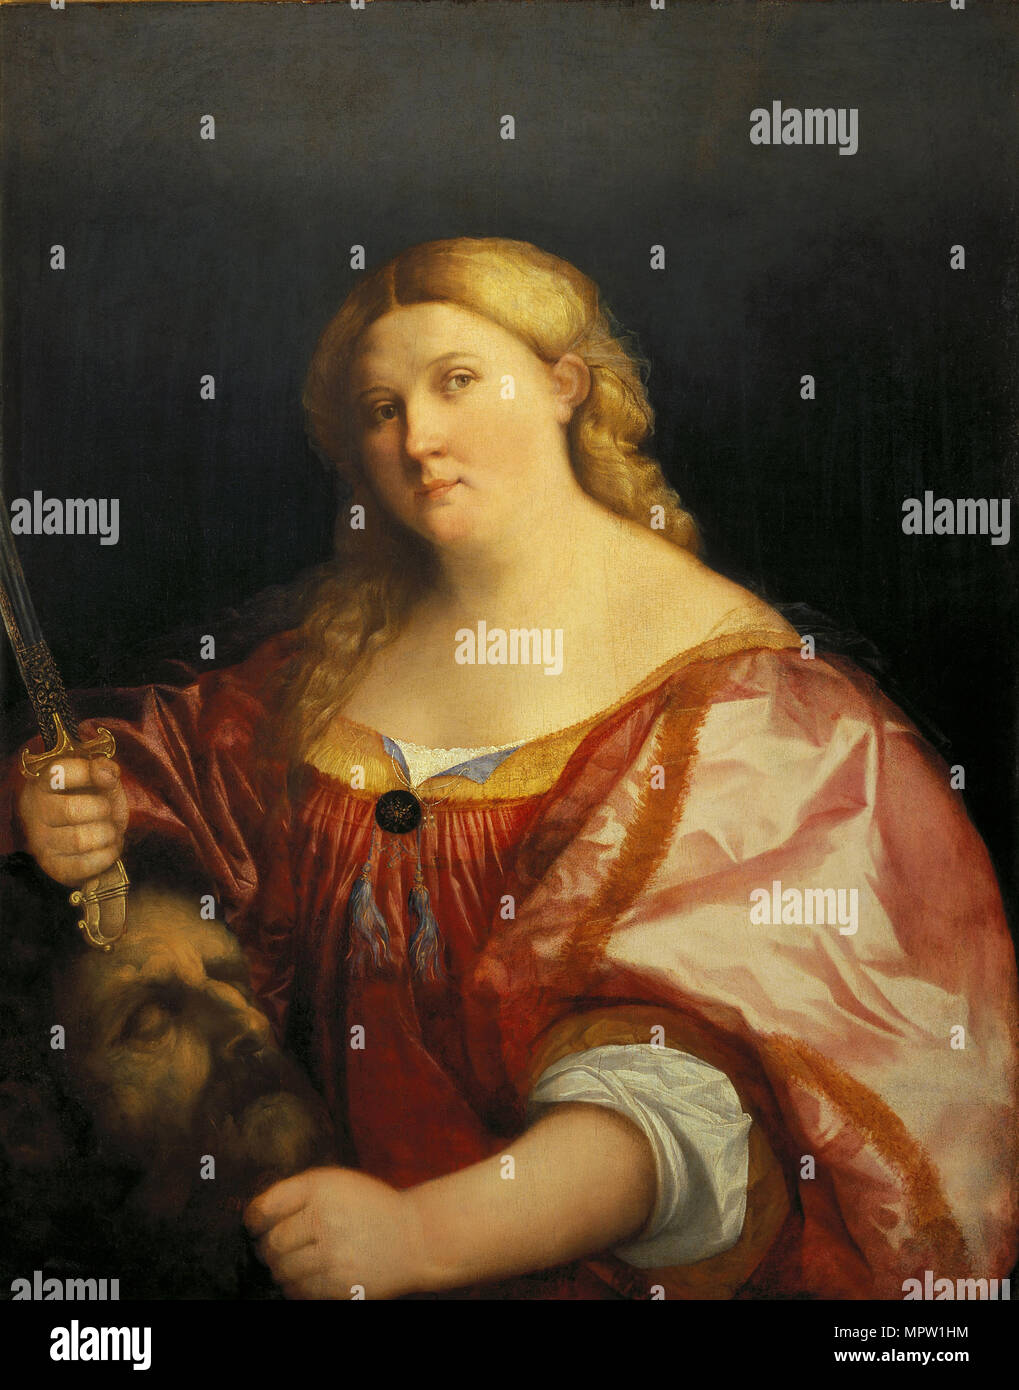 Judith with the Head of Holofernes, 1525-1526. Stock Photo